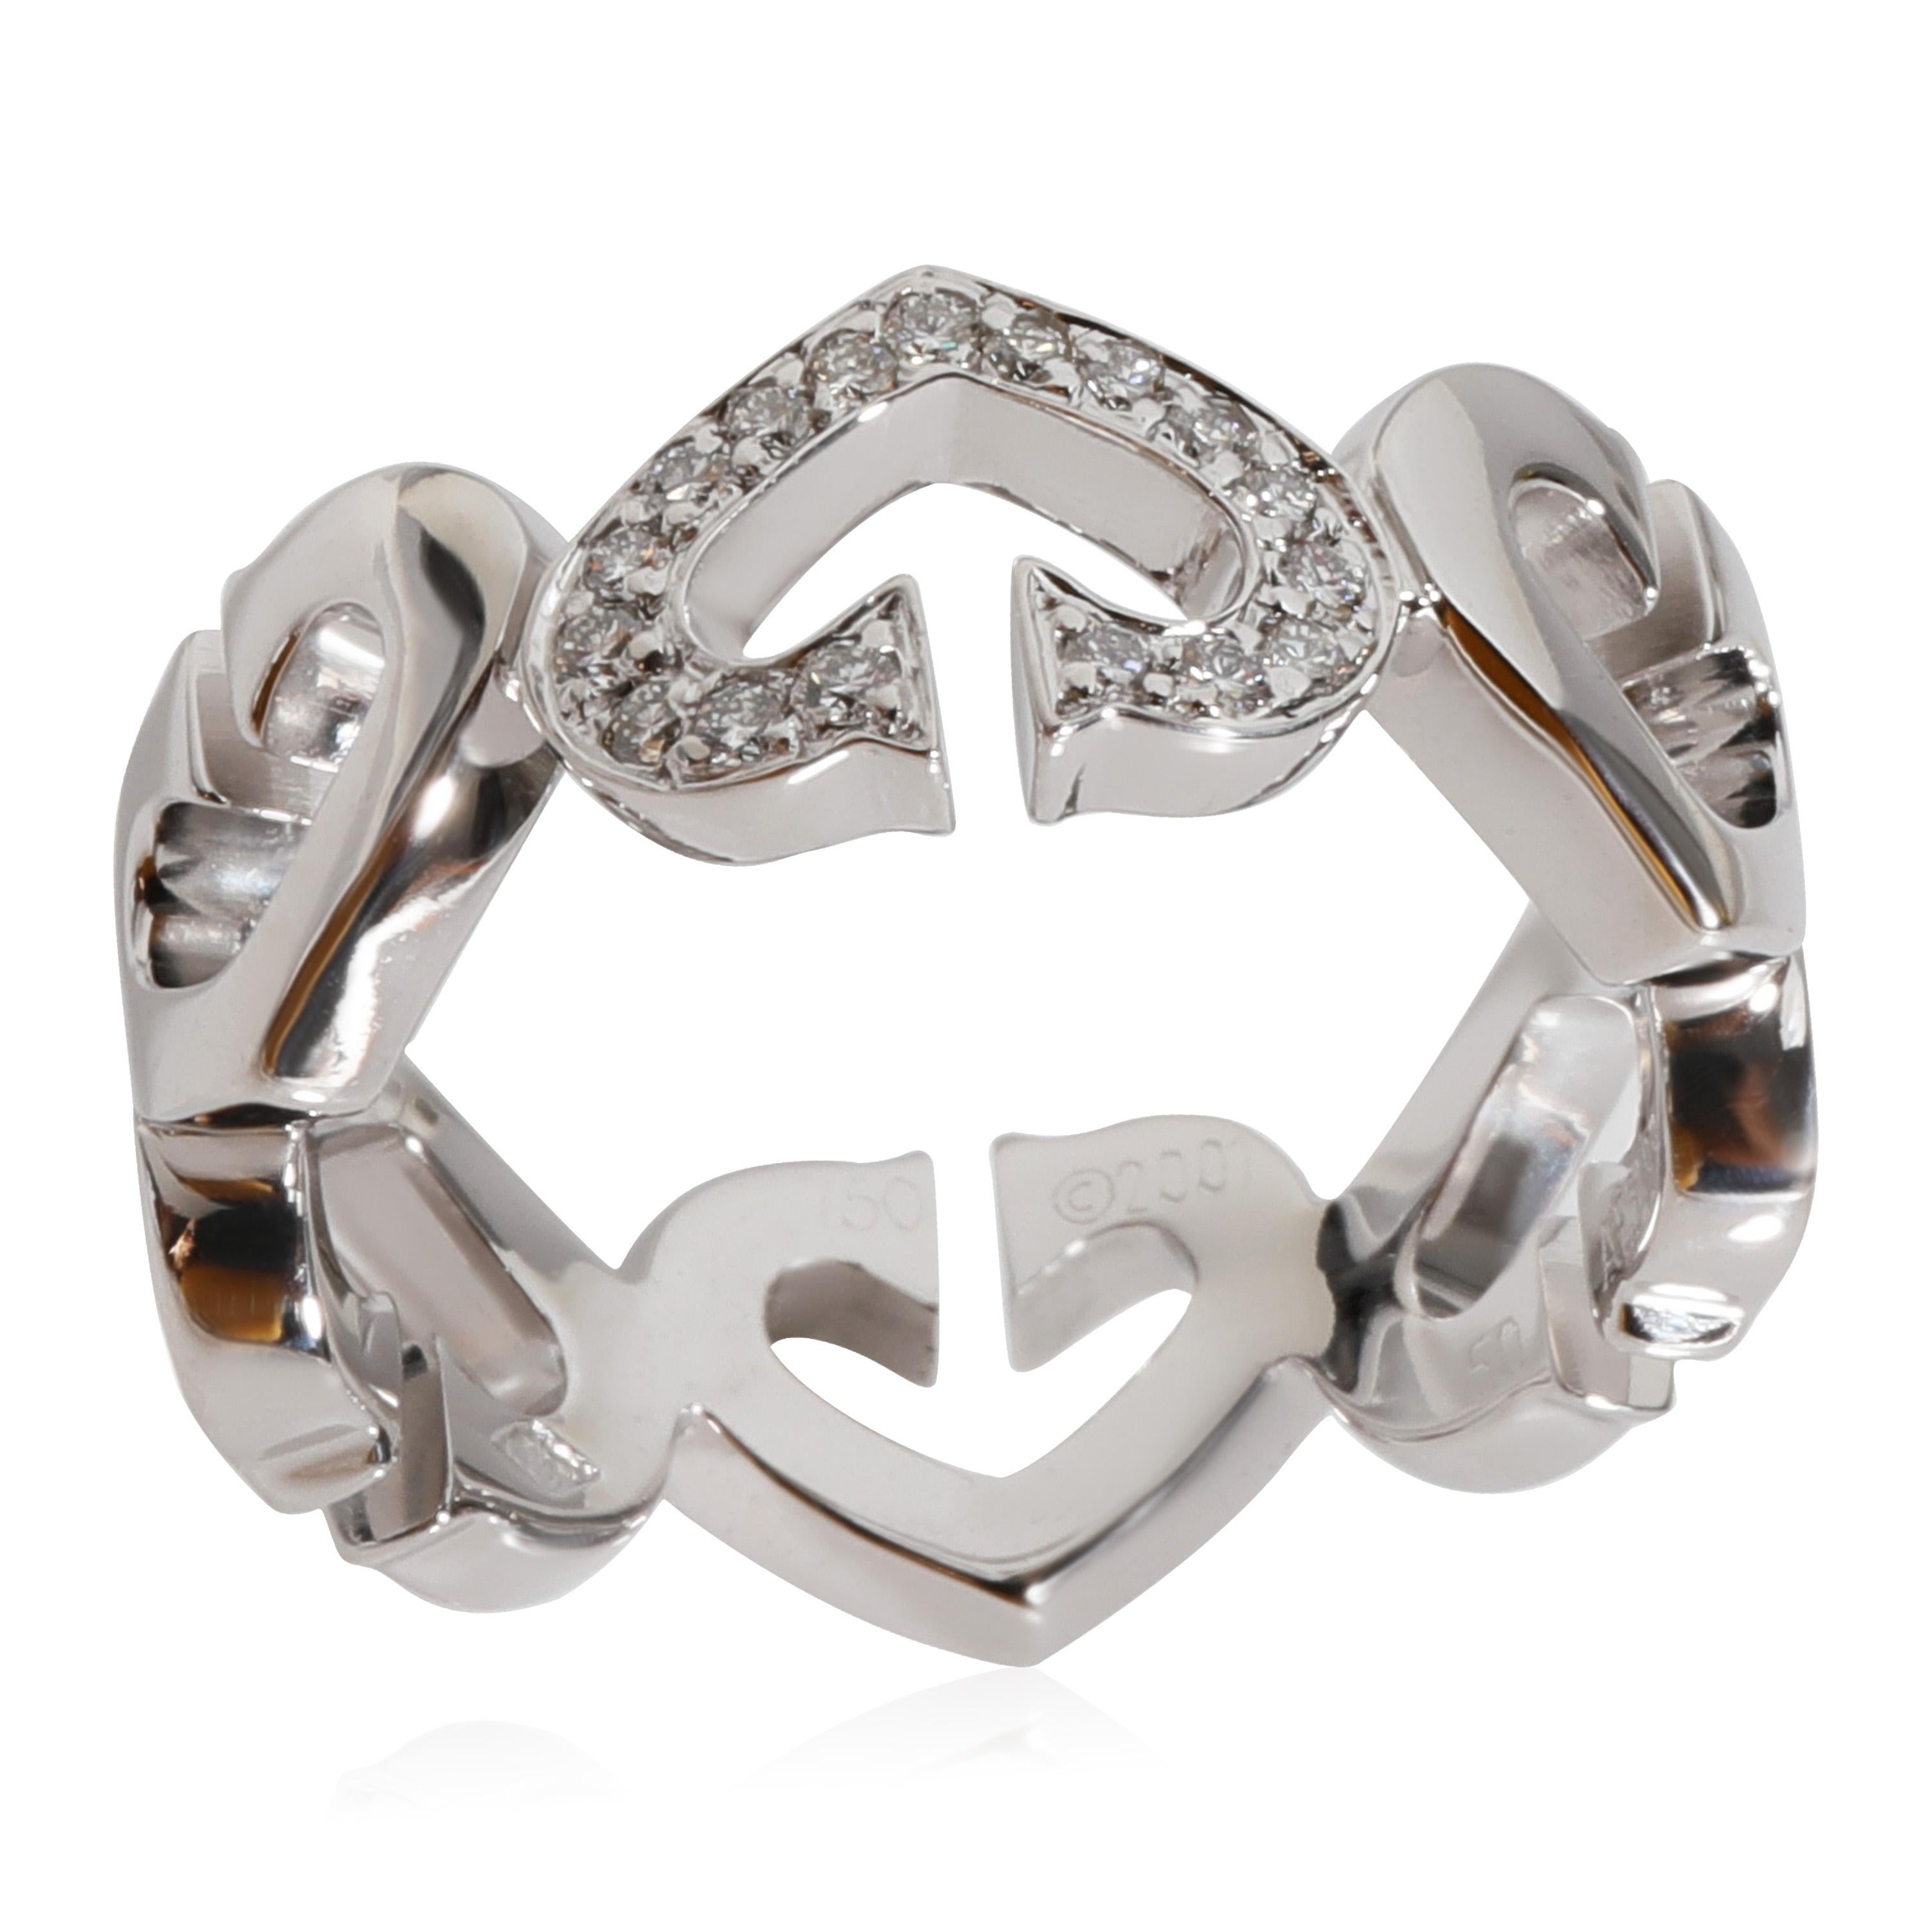 Cartier C De Cartier Heart Ring in 18k White Gold 0.13 CTW

PRIMARY DETAILS
SKU: 123195
Listing Title: Cartier C De Cartier Heart Ring in 18k White Gold 0.13 CTW
Condition Description: Retails for 4550 USD. In excellent condition and recently